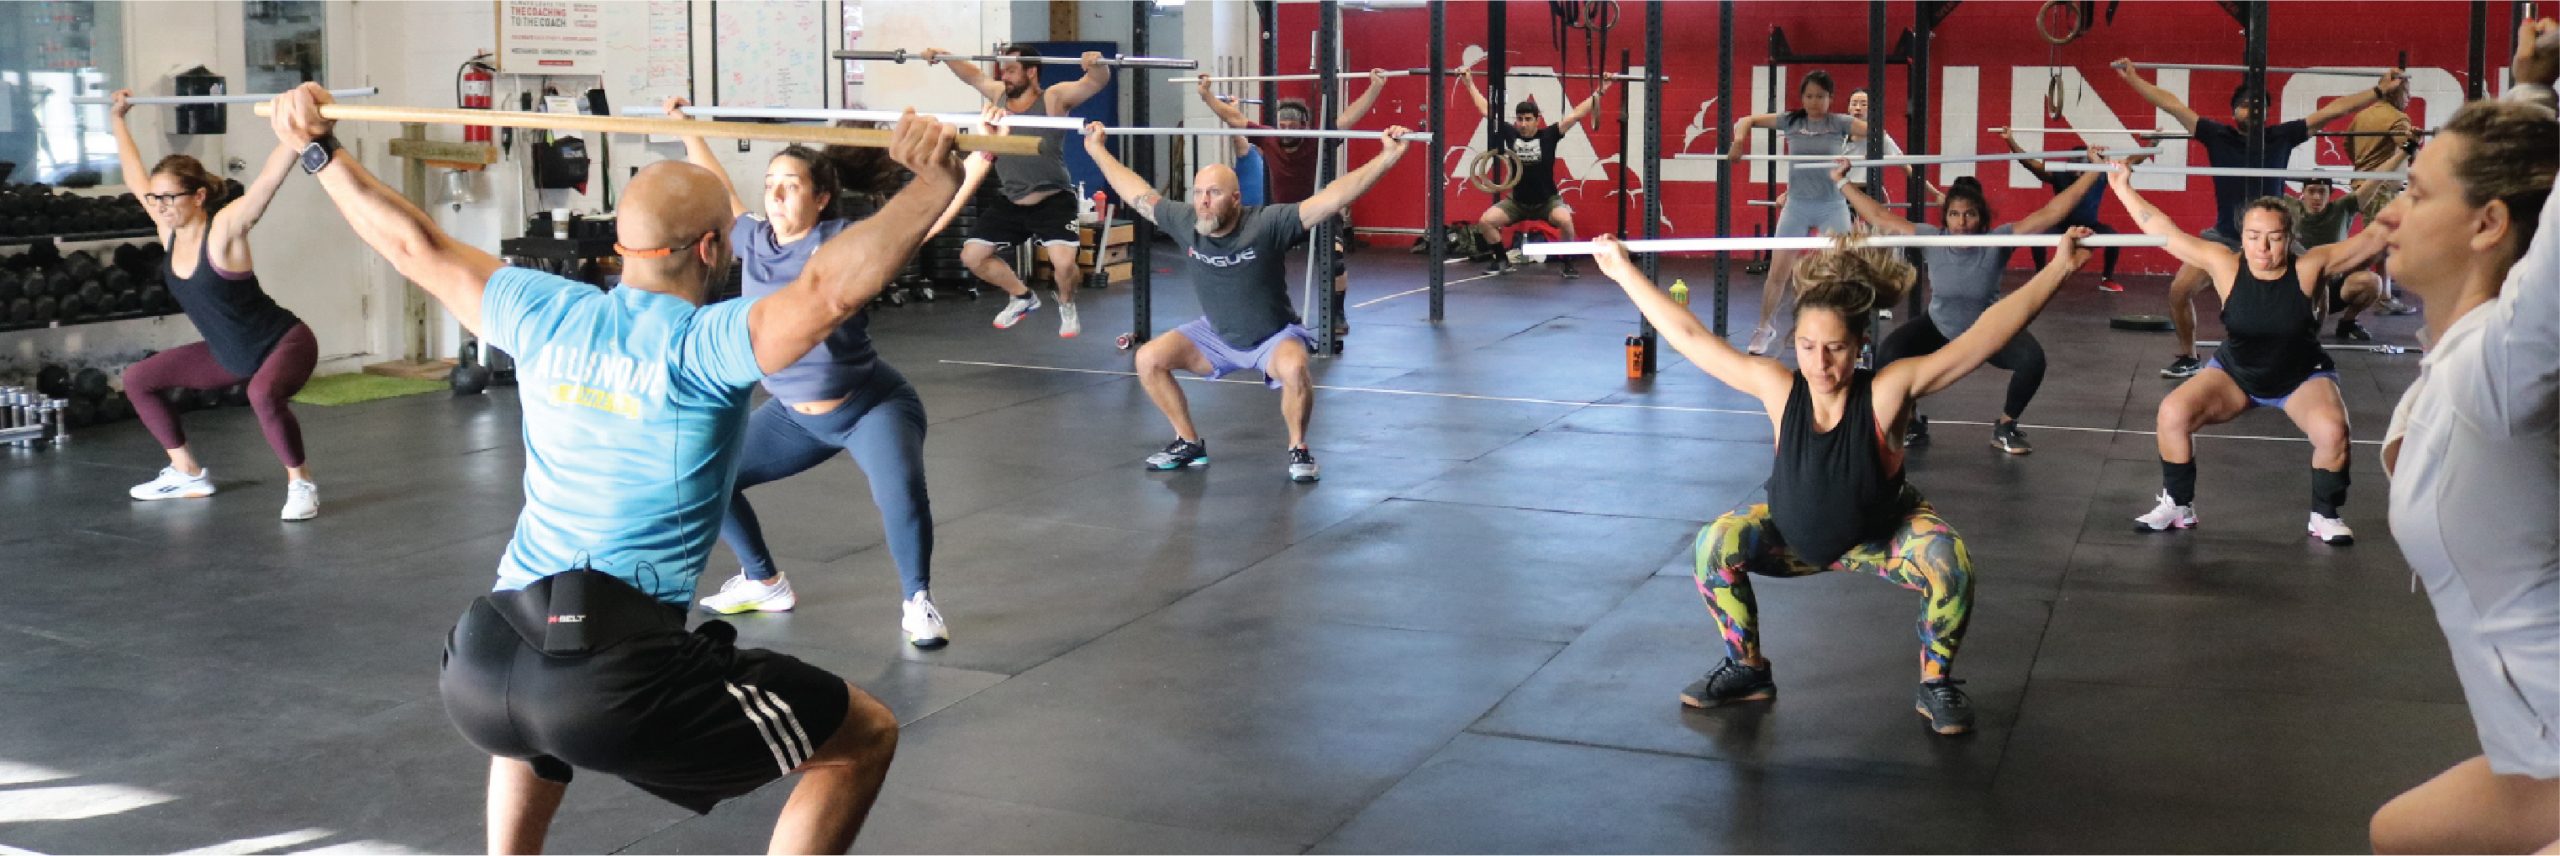 Starting CrossFit Out of Shape: Your Empowering Journey to a Stronger, Fitter You!